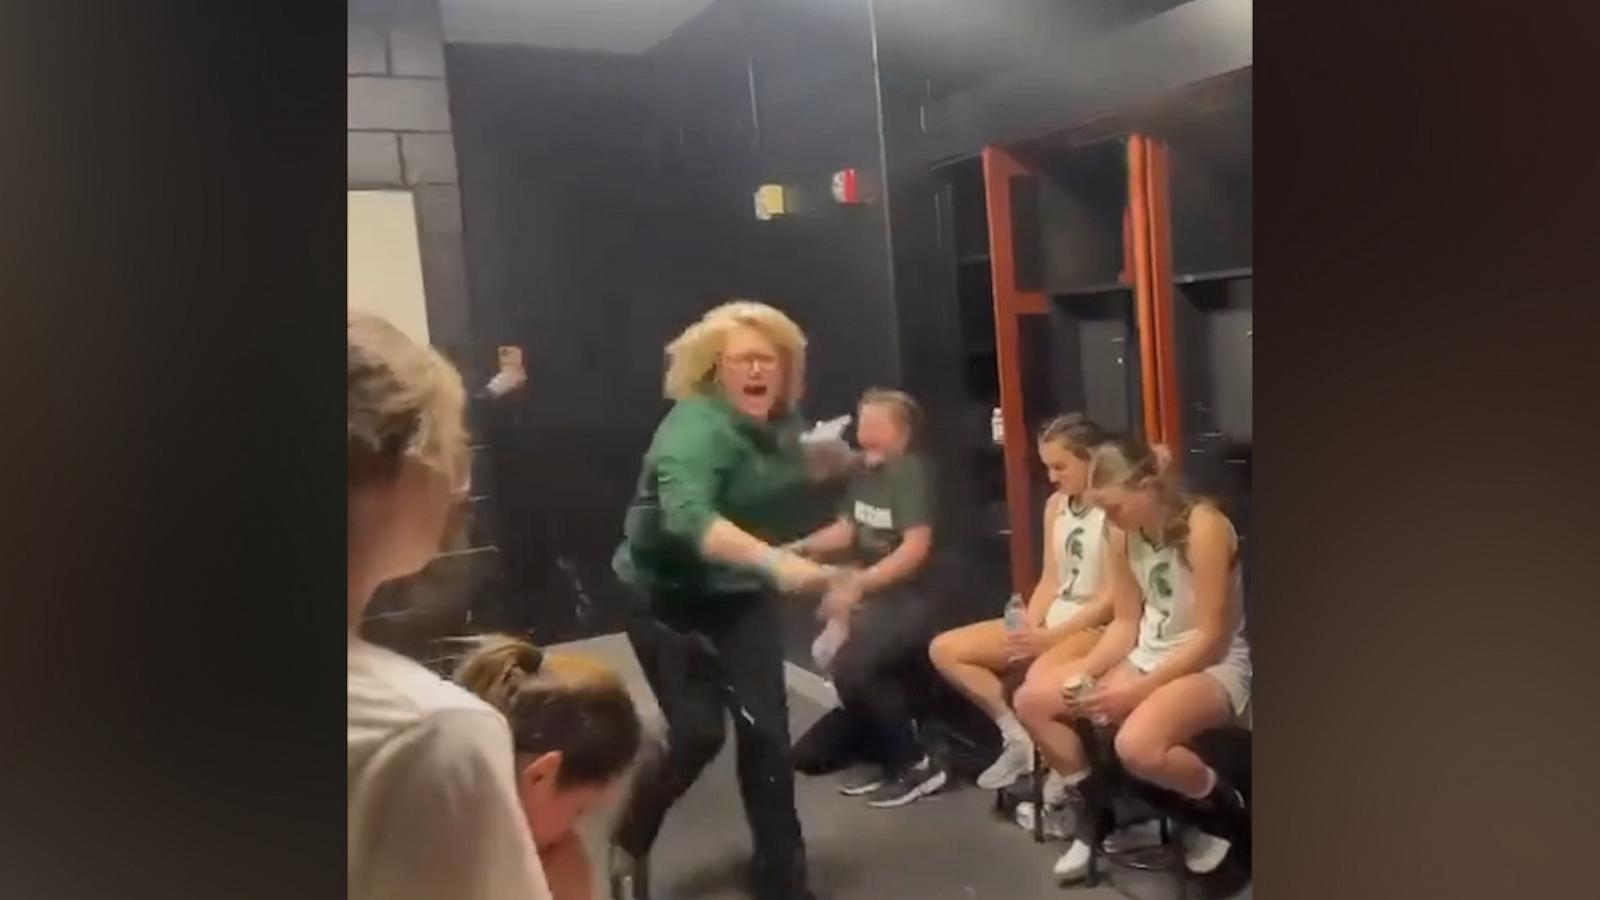 VIDEO: Basketball team hilariously pranks coach after winning state championship